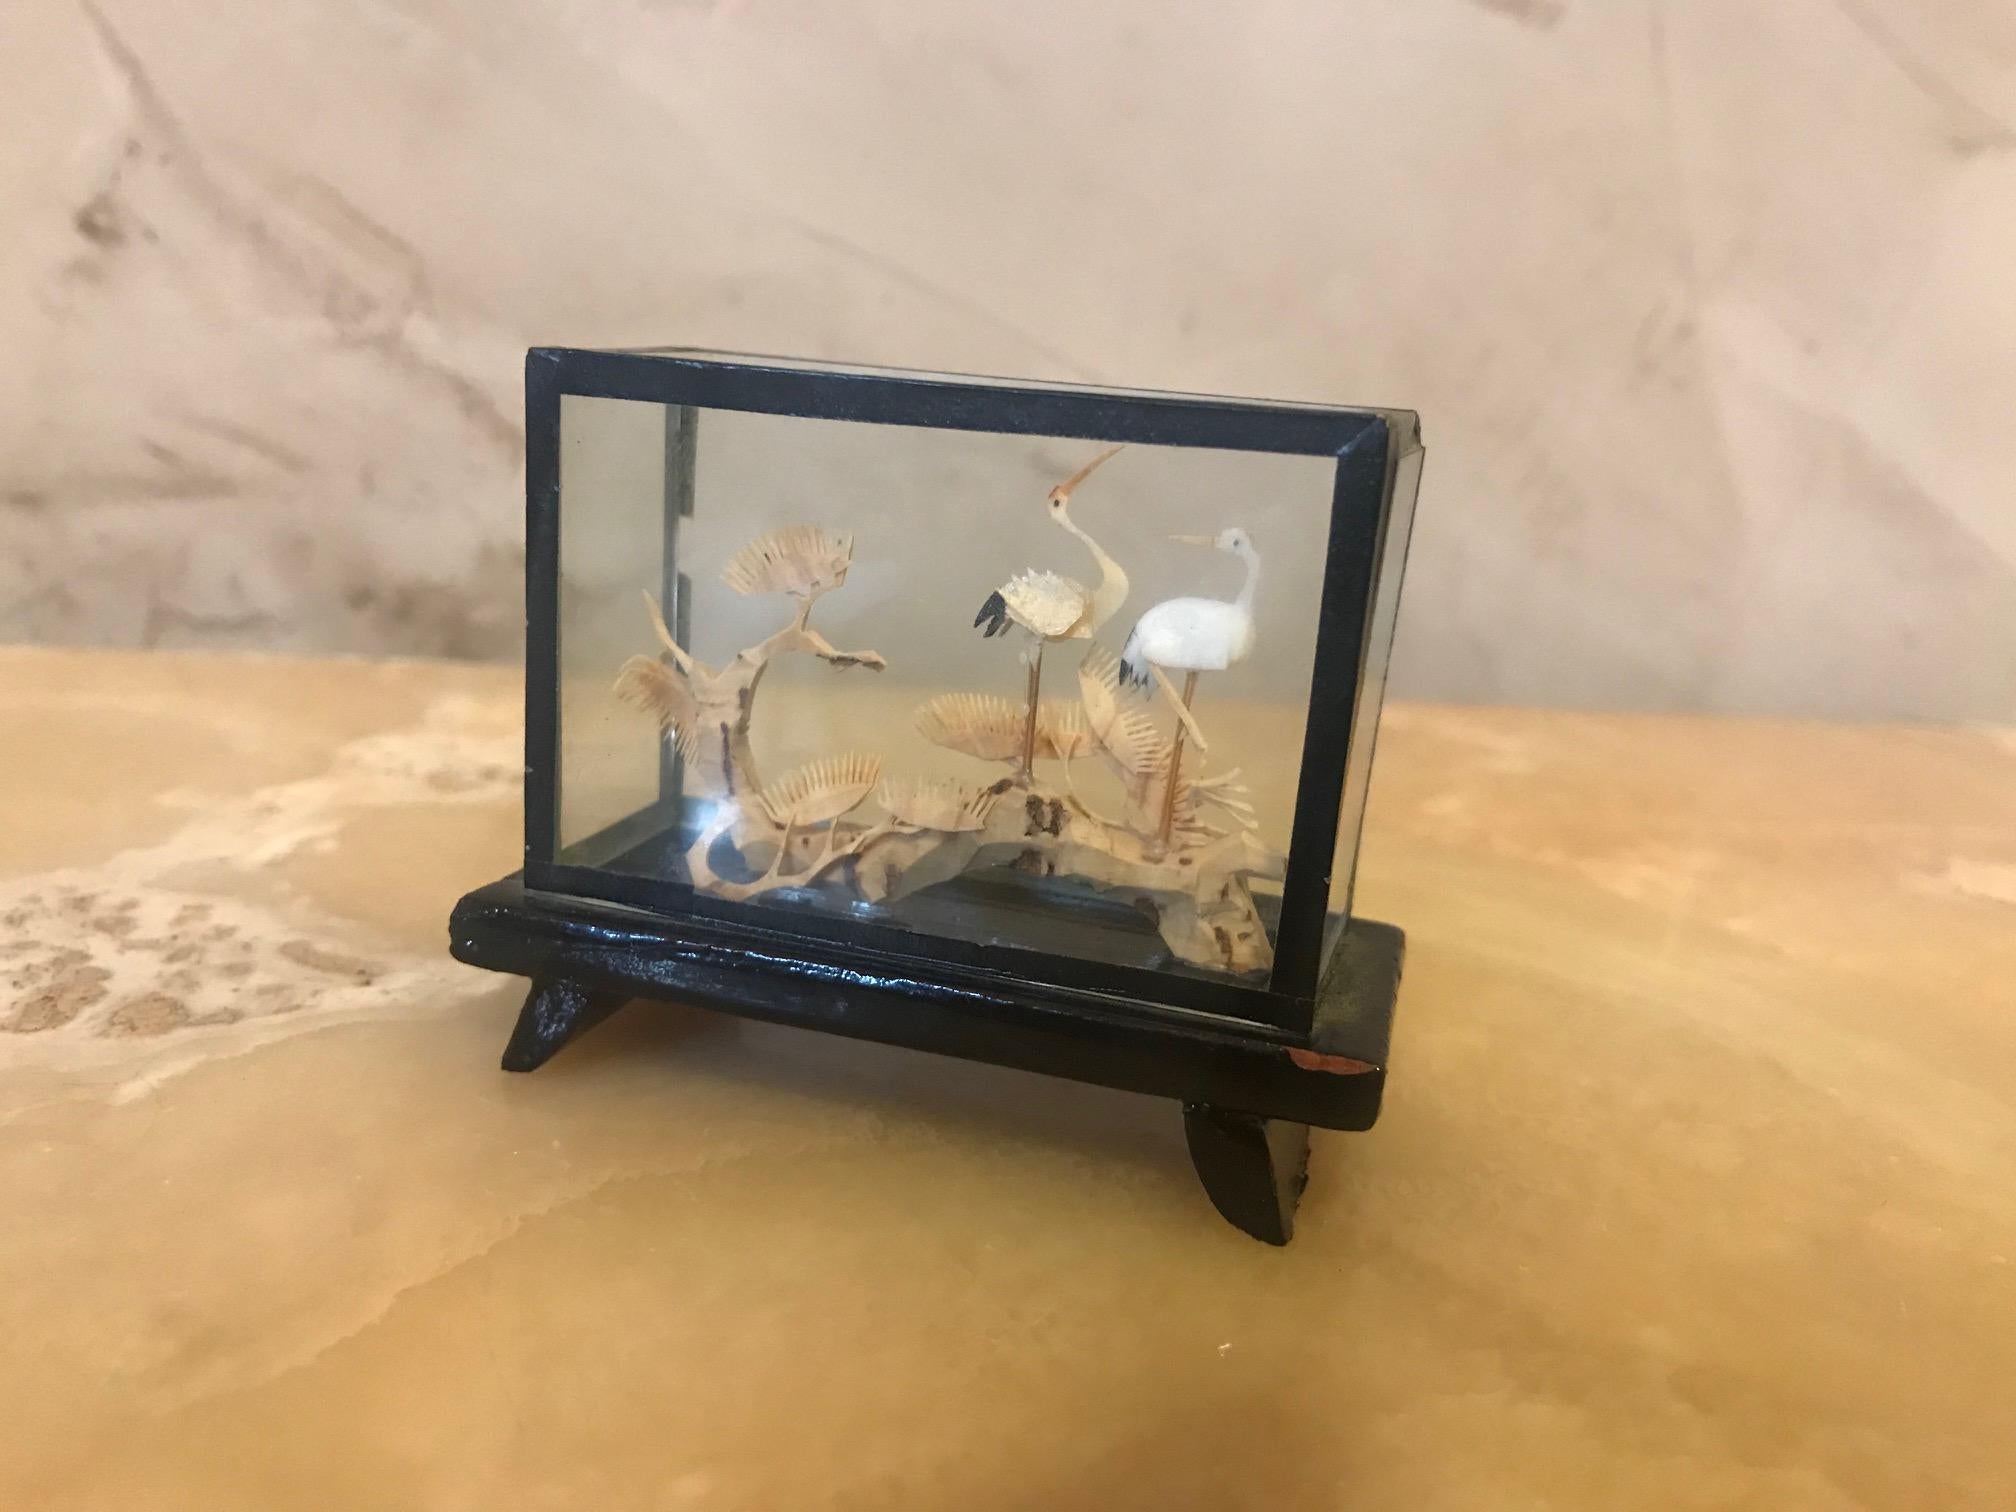 Beautiful 20th century rectangular Chinese Cork diorama.
Finely carved decoration in its glass case and black lacquered base.
Careful and delicate work of miniature sculpture, representing Storks on trees. 
Asian traditional cork sculpture made